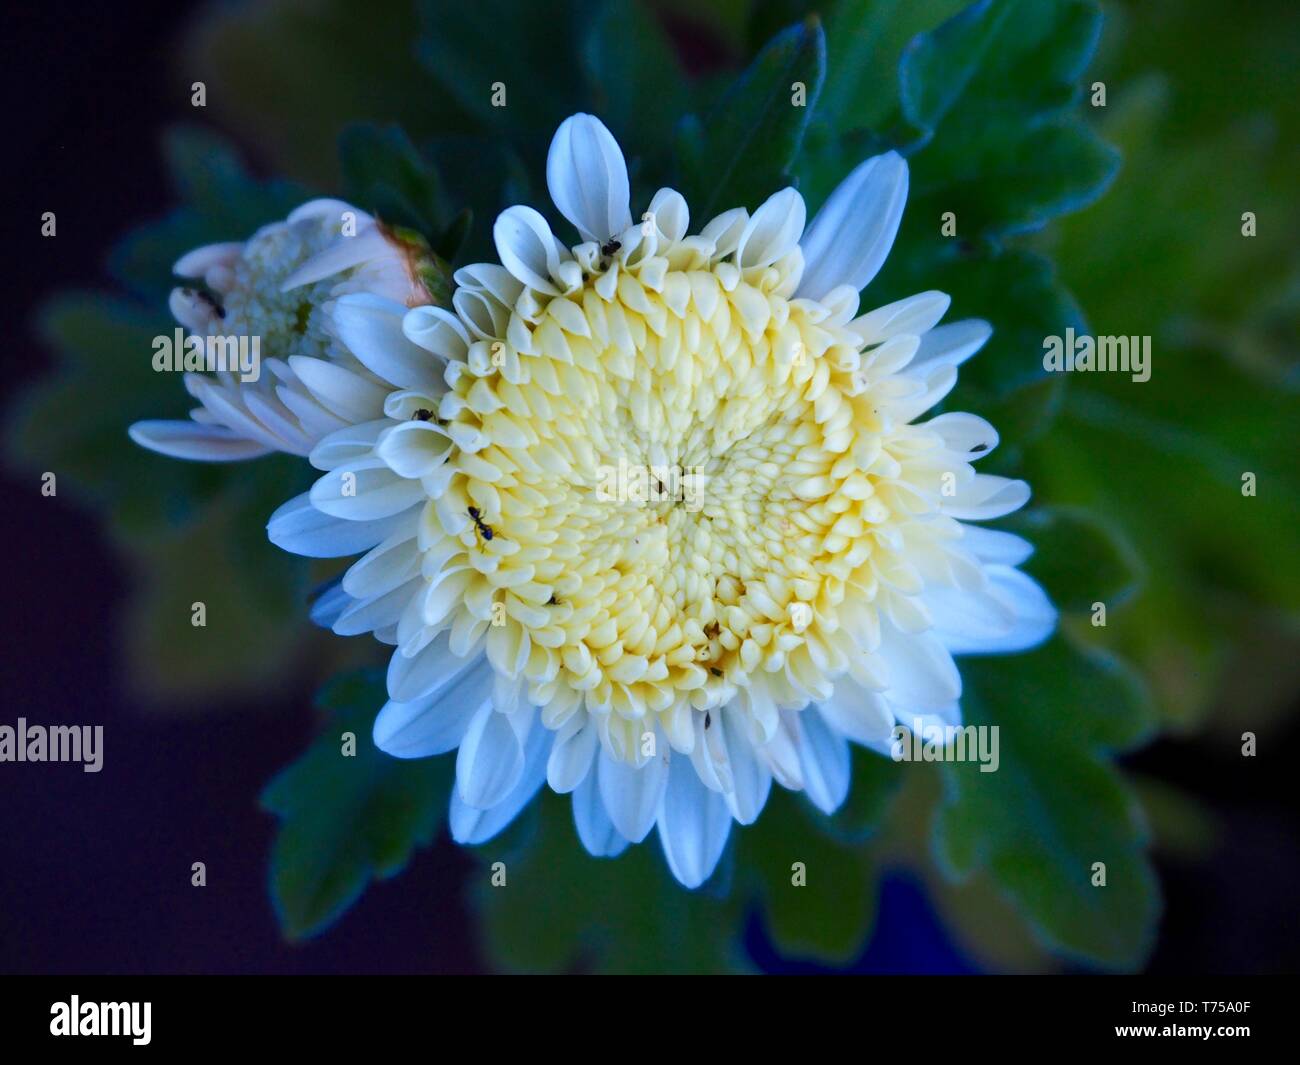 Flowers, bright creamy white Chrysanthemums opening, many petals, green leaves,  in an Australian Coastal garden Stock Photo